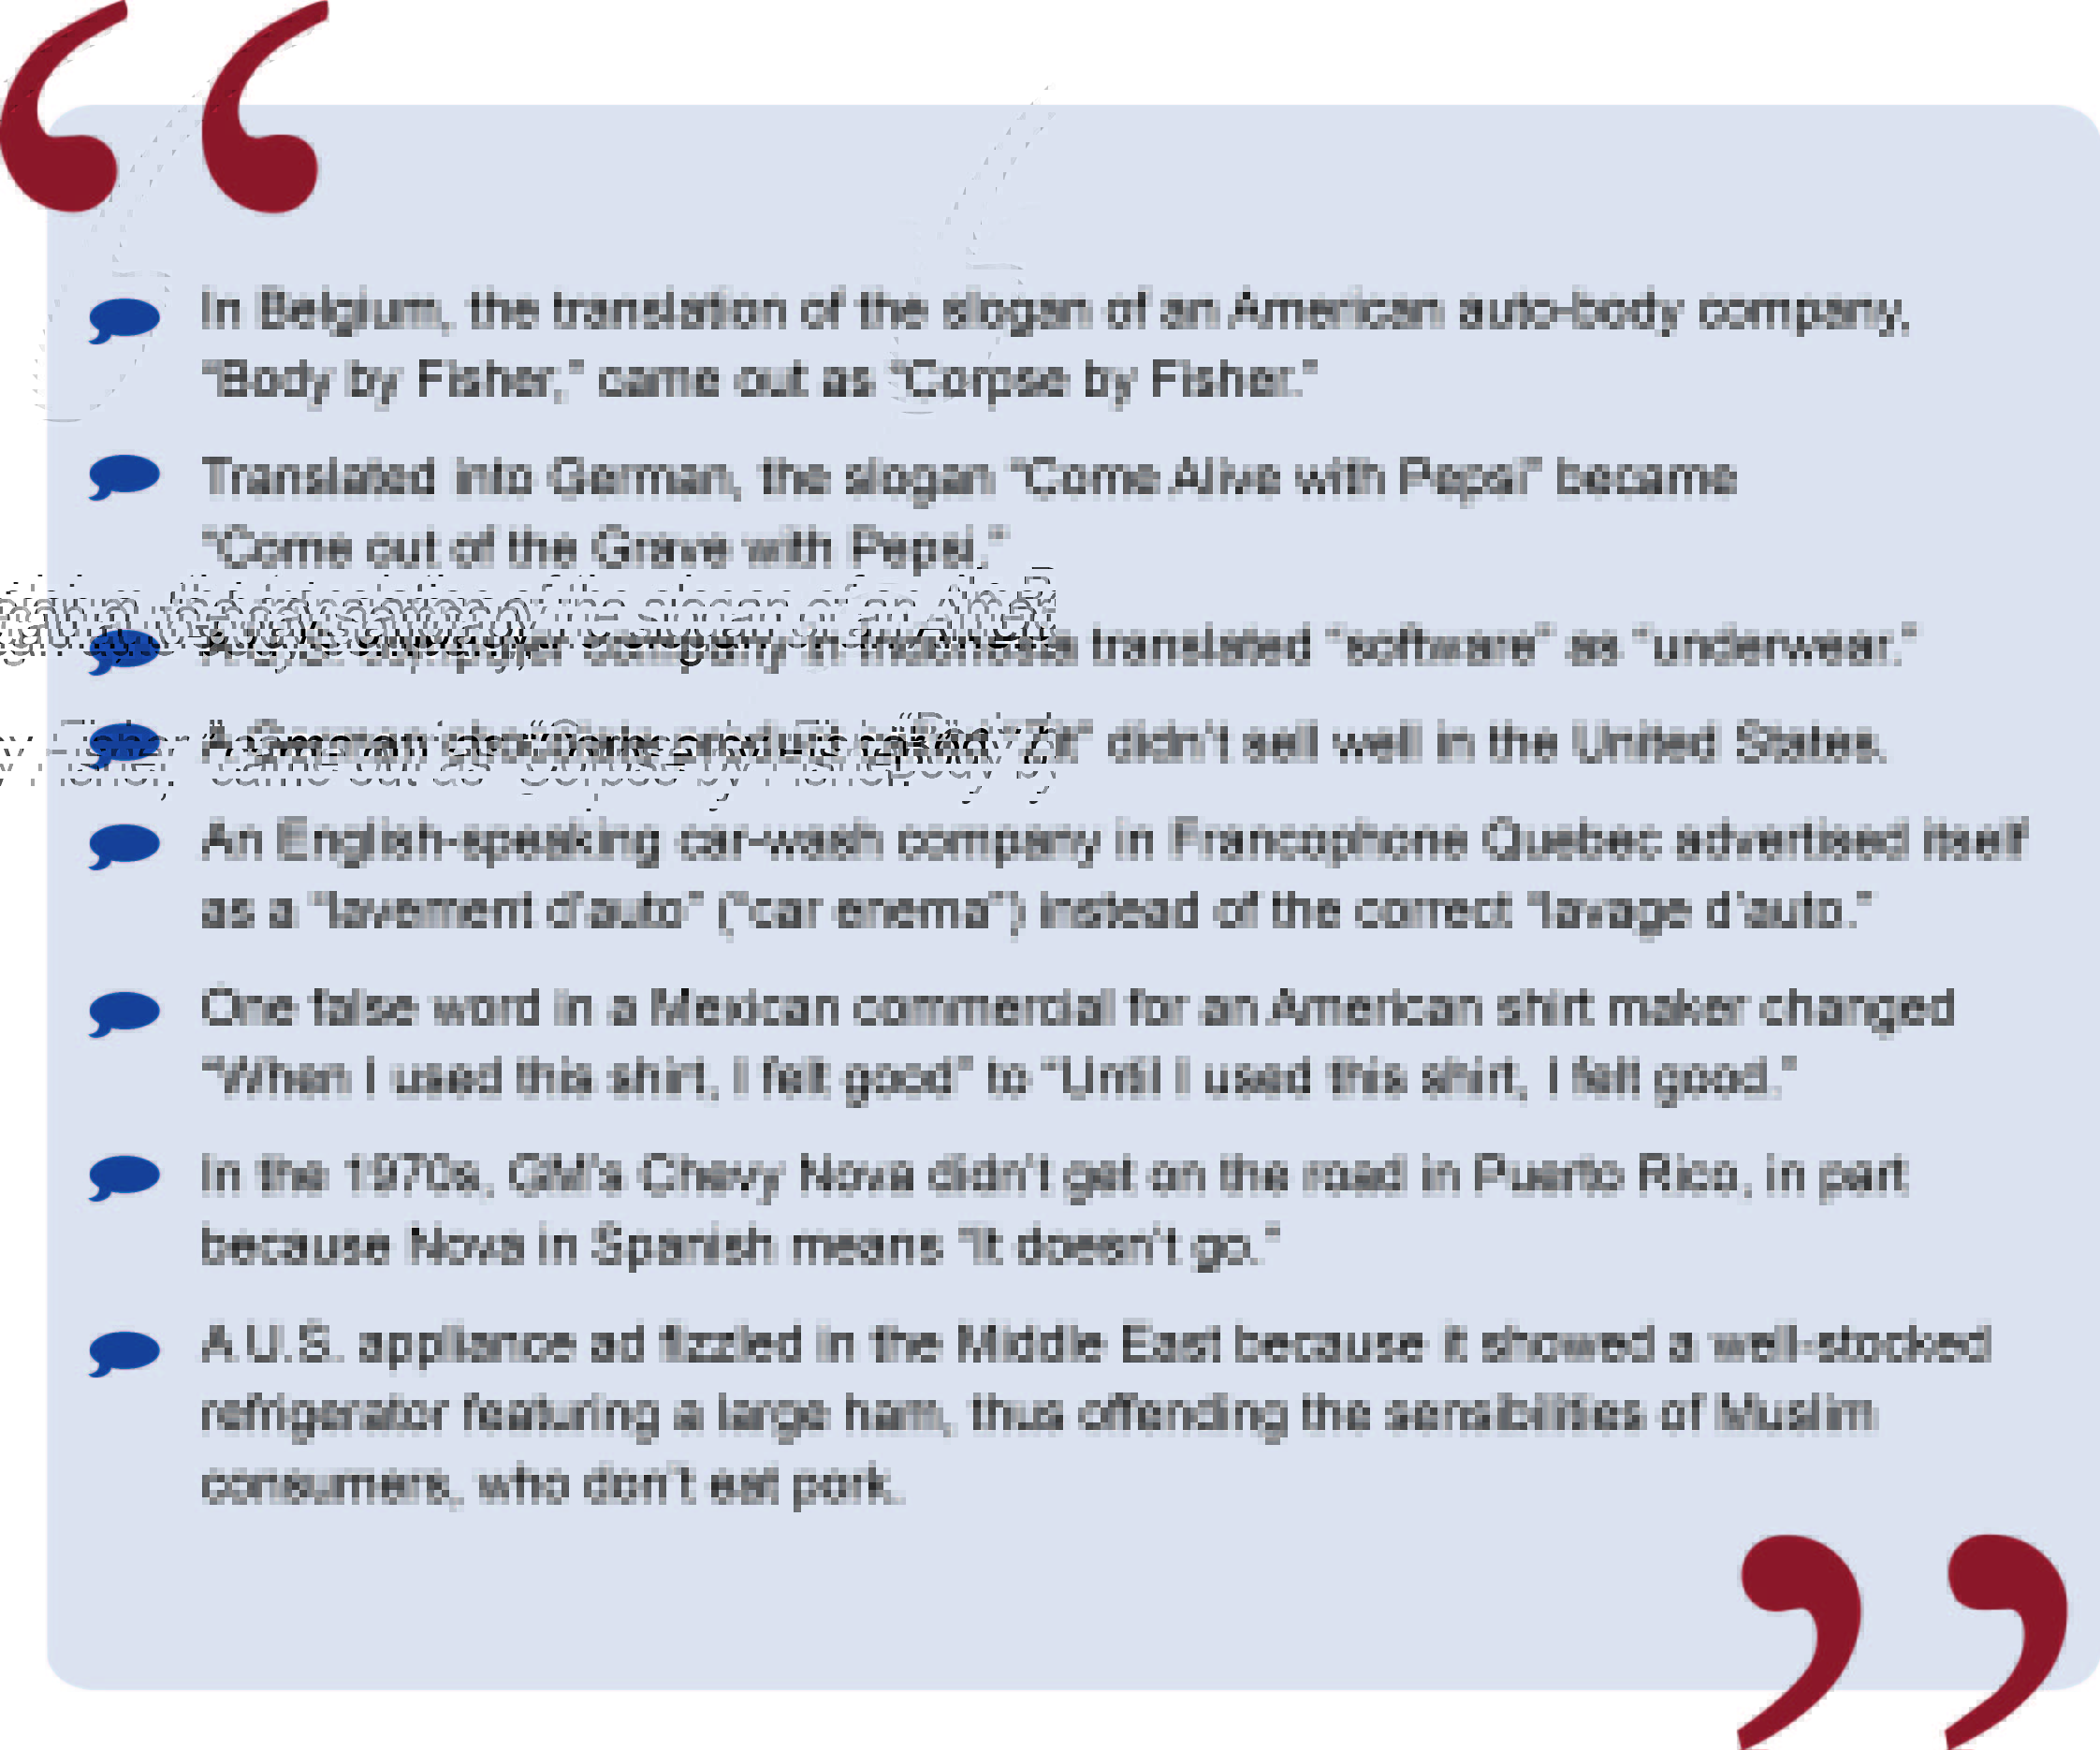 A text list of eight different instances of where English translations resulted in blunders. Listed in order from top to bottom; -In Belgium, the translation of the slogan of an American auto-body company, “Body by Fisher,” came out as “Corpse by Fisher.” -Translated into German, the slogan “Come Alive with Pepsi” became “Come out of the Grave with Pepsi.” -A U.S. computer company in Indonesia translated “software” as “underwear.” -A German chocolate product called “Zit” didn’t sell well in the United States. -An English-speaking car-wash company in Francophone Quebec advertised itself as a “lavement d’auto” (“car enema”) instead of the correct “lavage d’auto.” -One false word in a Mexican commercial for an American shirt maker changed “When I used this shirt, I felt good” to “Until I used this shirt, I felt good.” -In the 1970s, GM’s Chevy Nova didn’t get on the road in Puerto Rico, in part because Nova in Spanish means “It doesn’t go.” -A U.S. appliance ad fizzled in the Middle East because it showed a well-stocked refrigerator featuring a large ham, thus offending the sensibilities of Muslim consumers, who don’t eat pork.